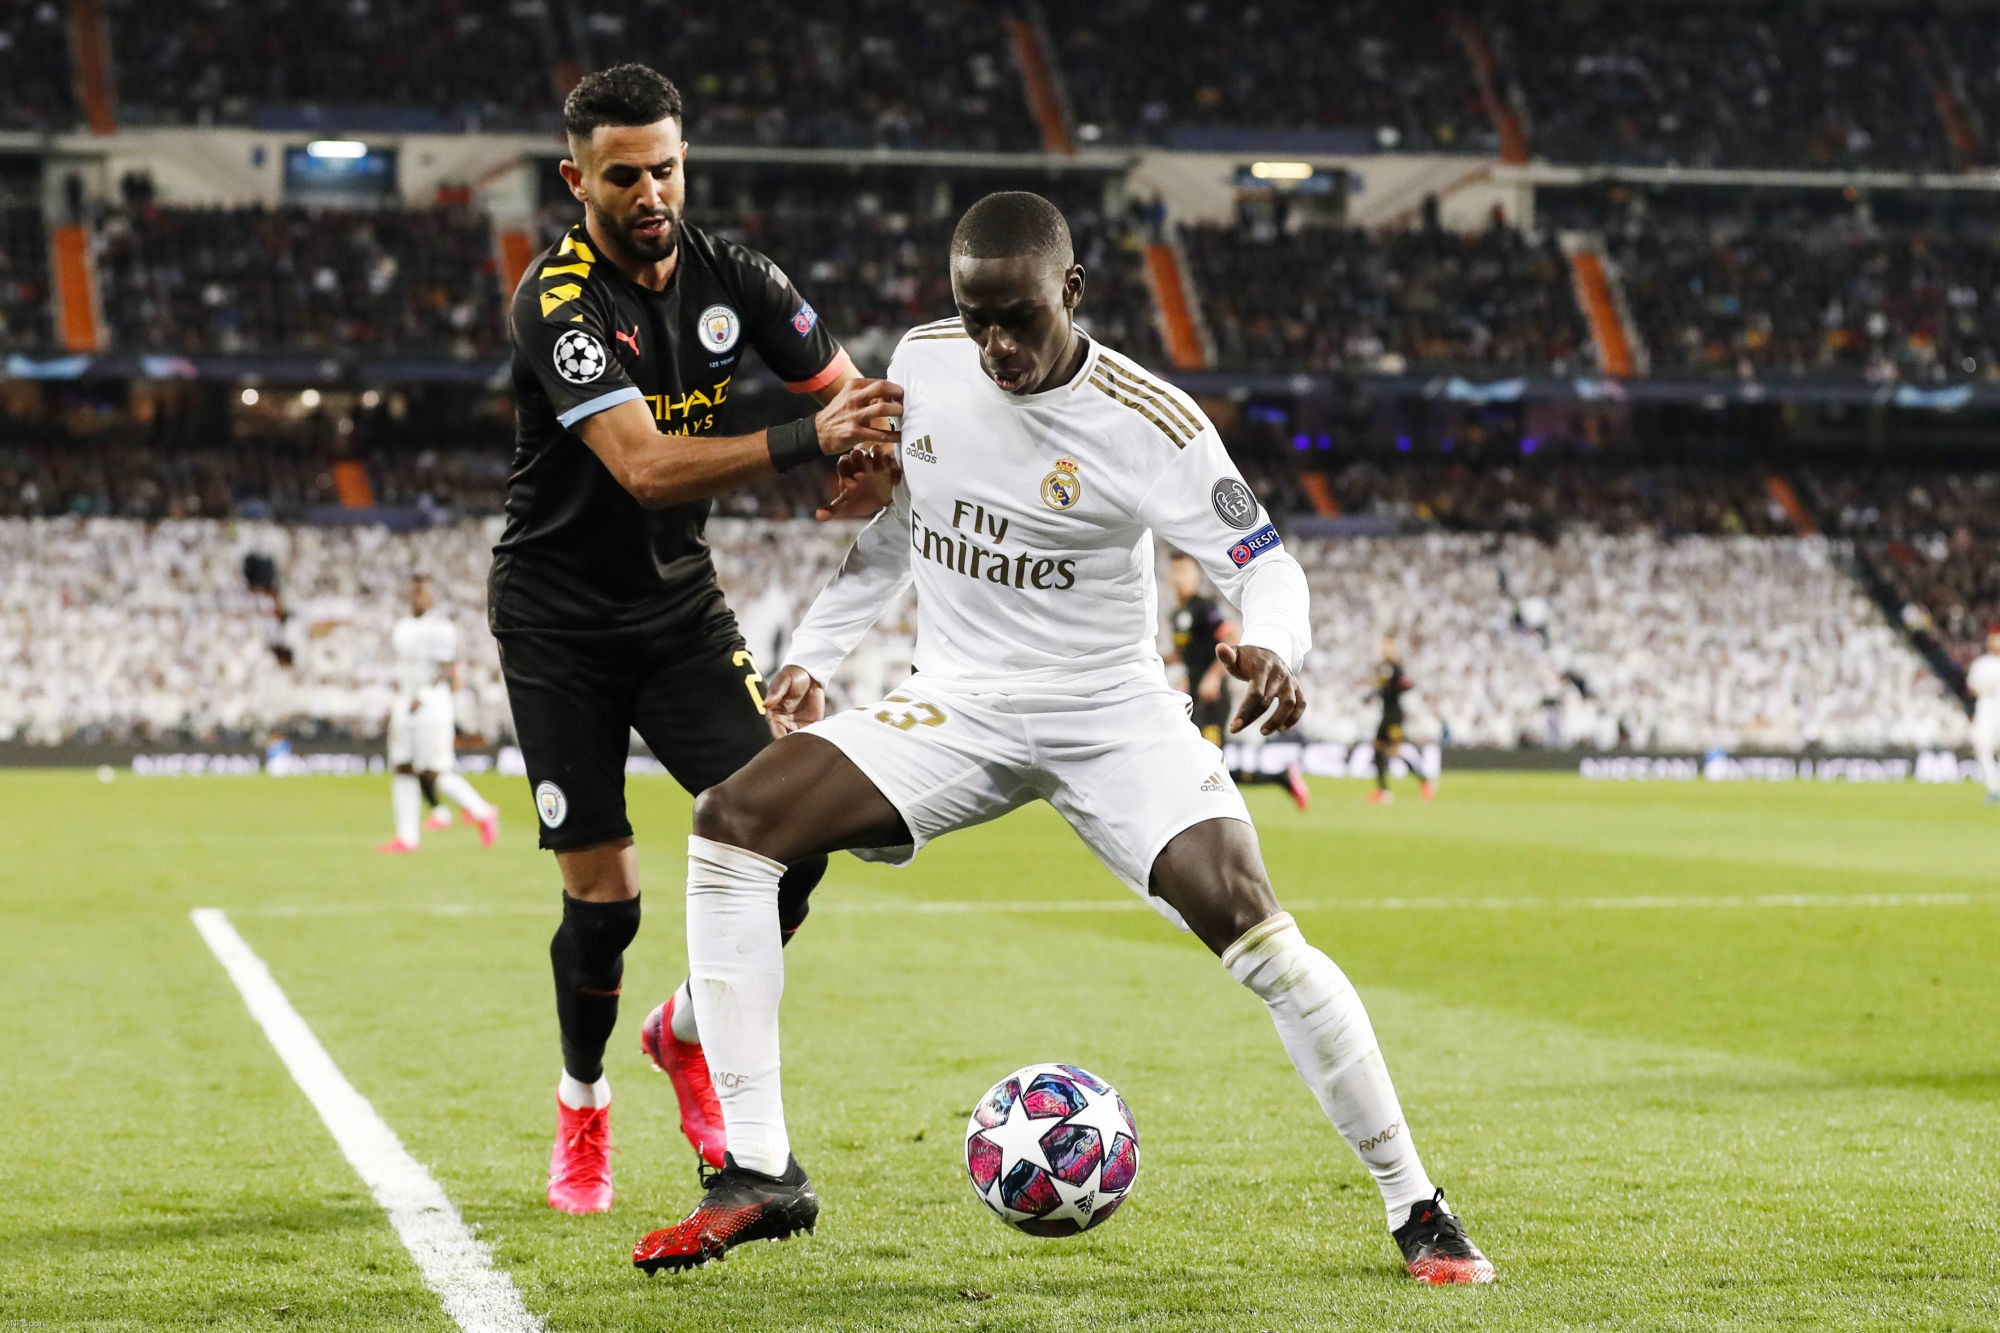 (l-r) Riyad Mahrez of Manchester City, Ferland Mendy of Real Madrid during the UEFA Champions League round of 16 first leg match between Real Madrid and Manchester City FC at the Santiago Bernabeu stadium on February 26, 2020 in Madrid, Spain 

Photo by Icon Sport - Ferland MENDY - Riyad MAHREZ - Stade Santiago-Bernabeu - Madrid (Espagne)